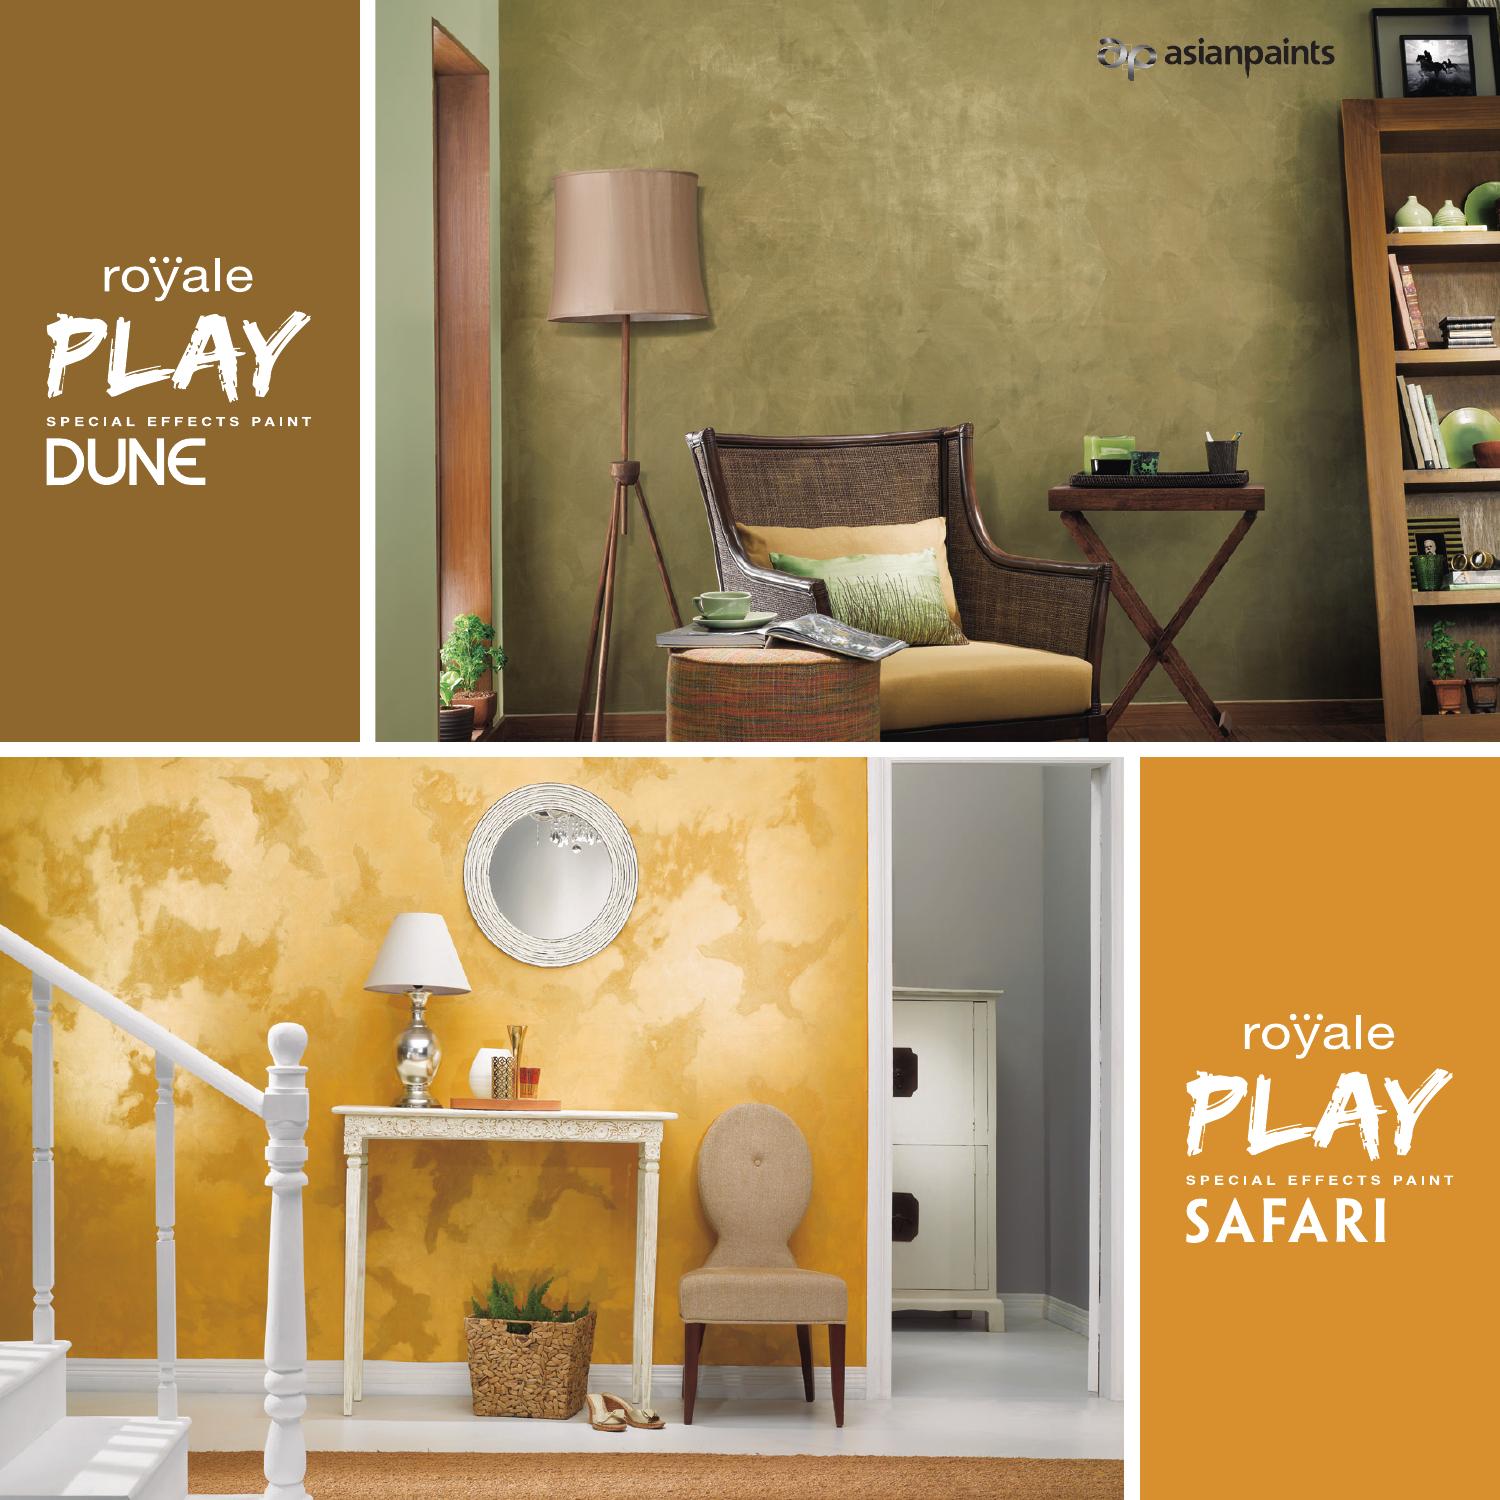 Vams reccomend Asian paints homepage